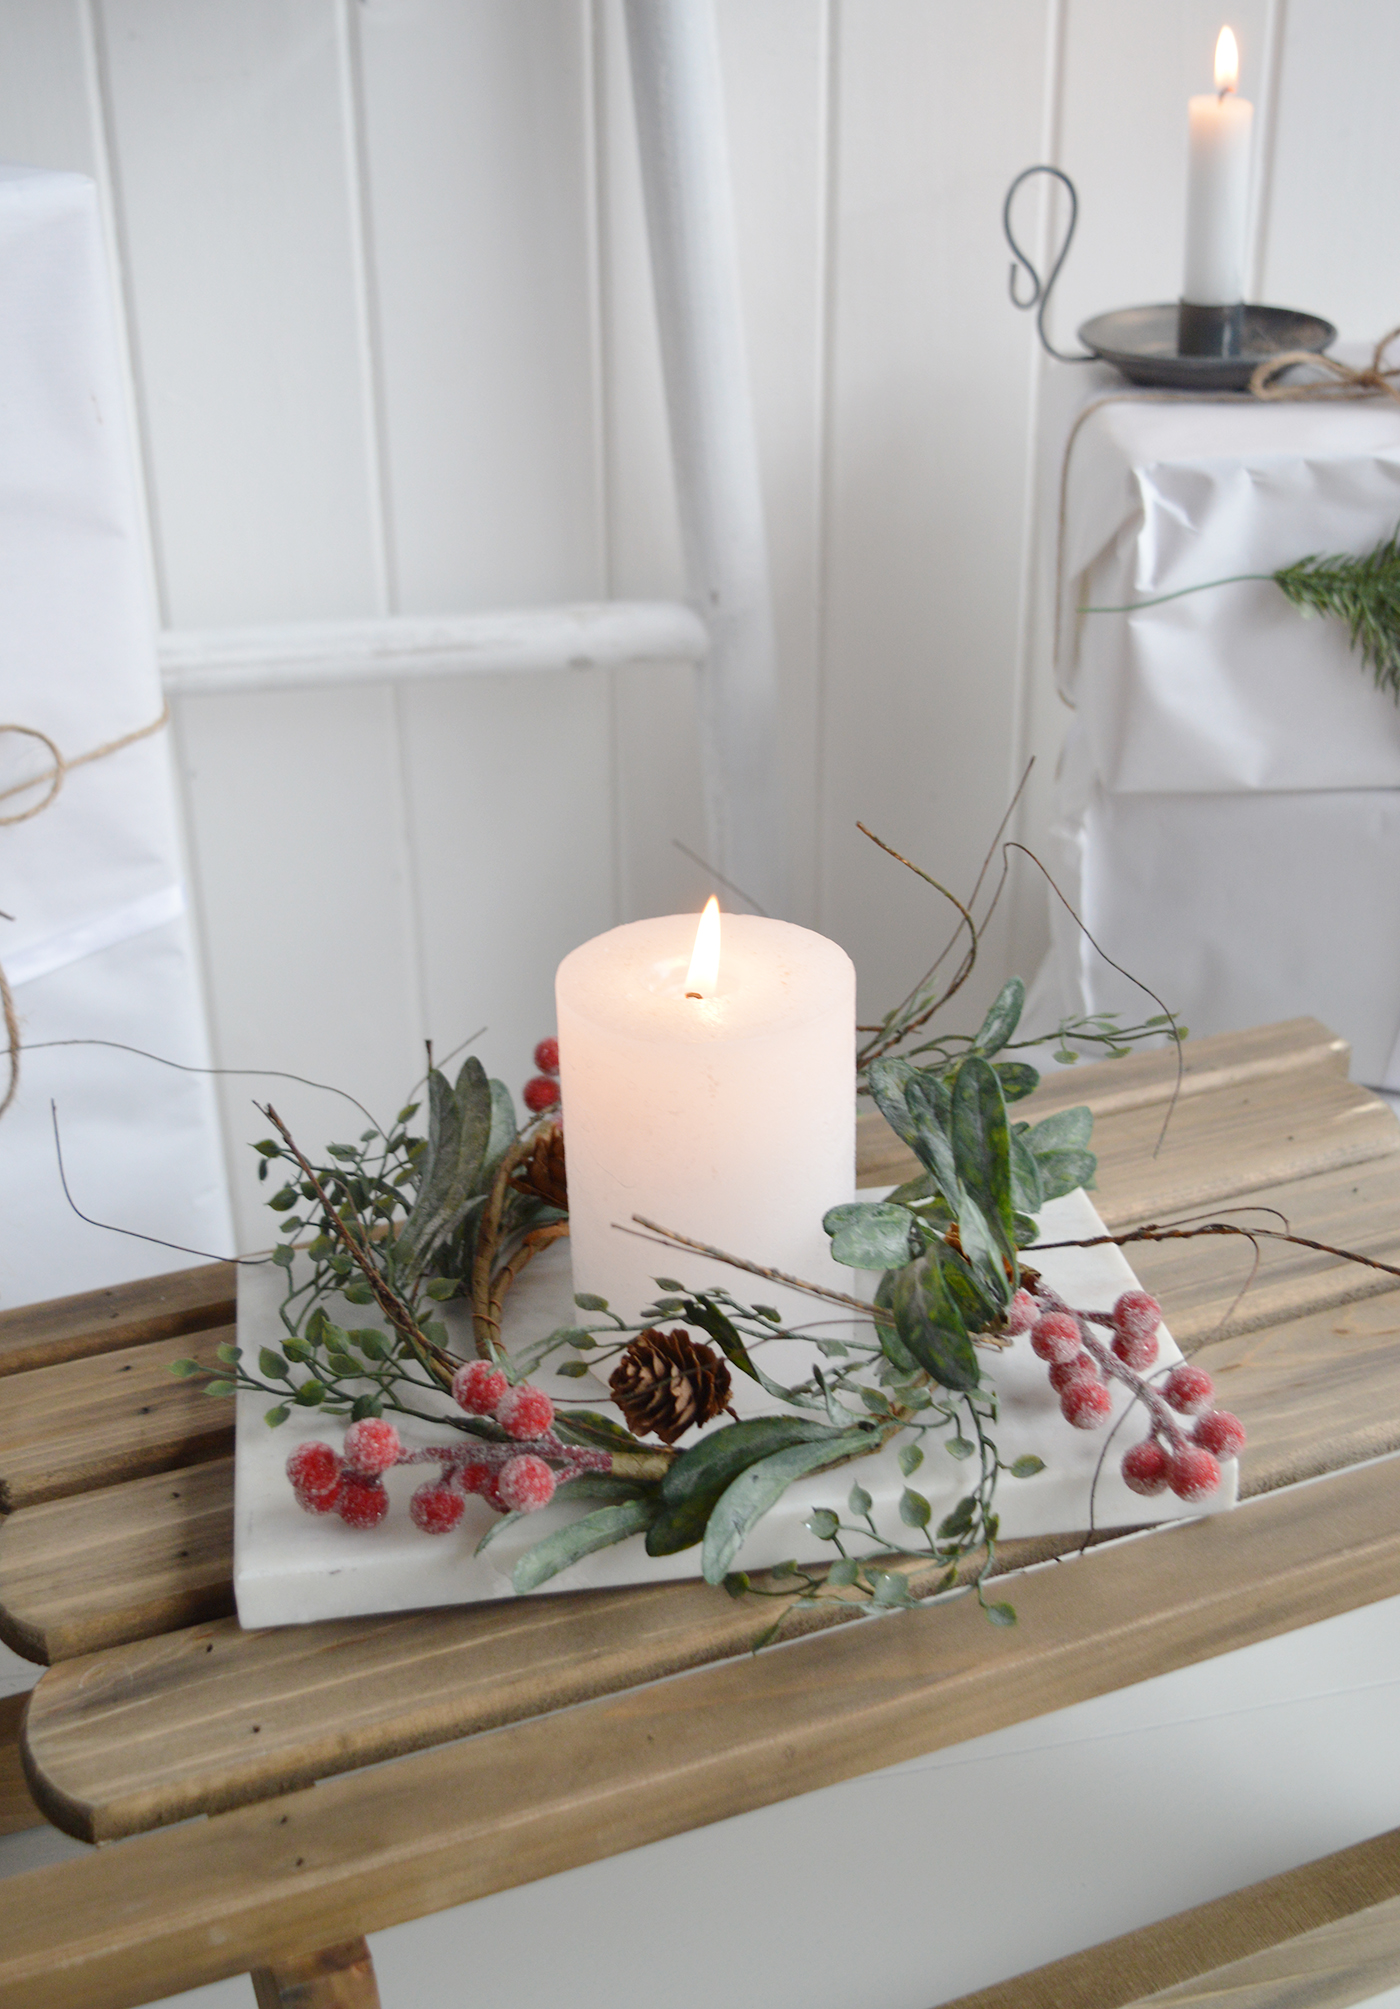 Candle ring with red barries for winter decorations